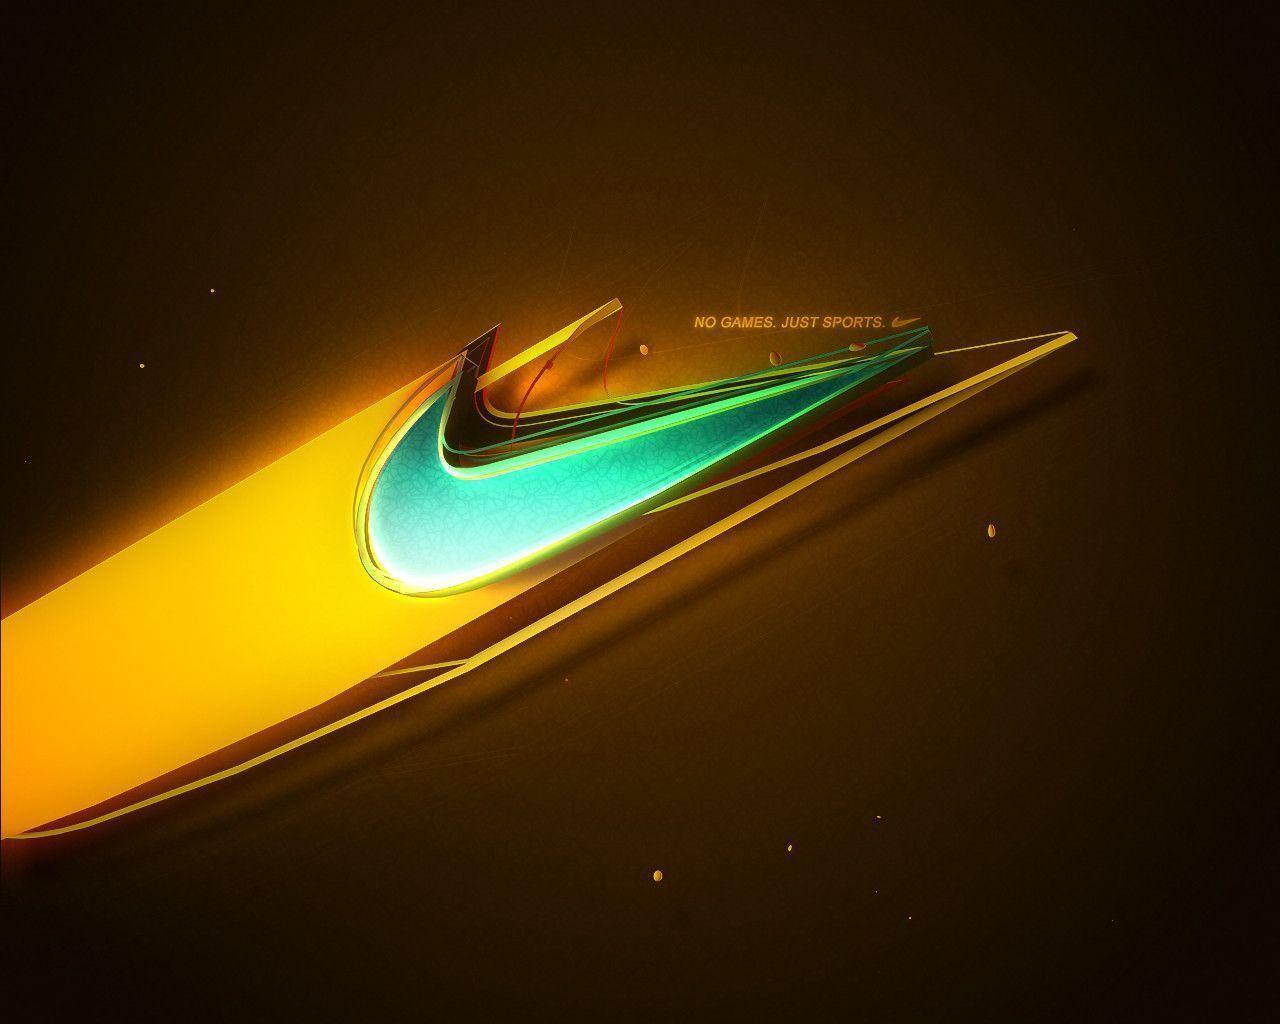 Nike Wallpaper and Background